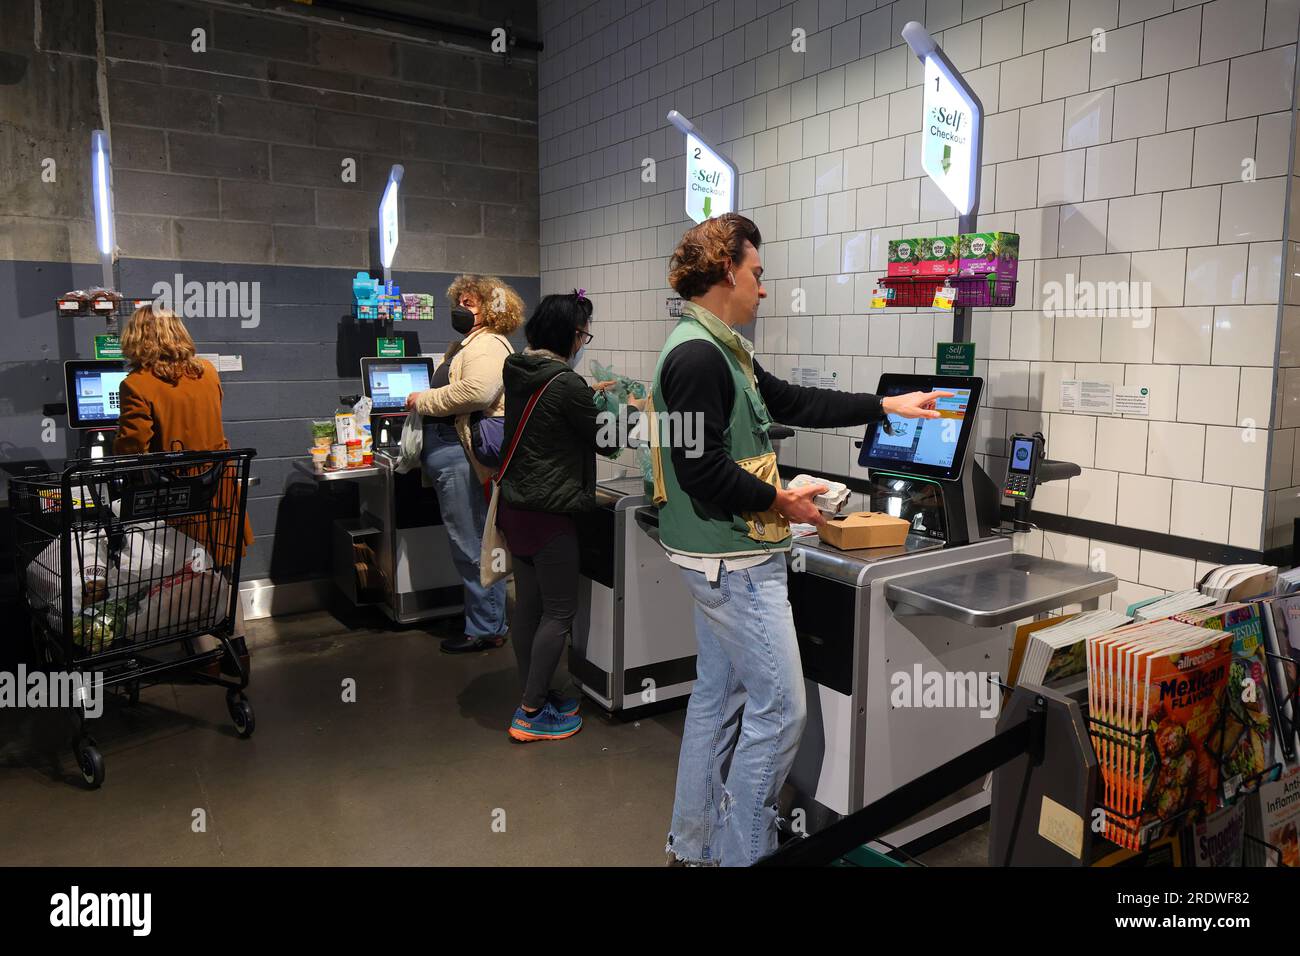 People at a self service, self-checkout till in a supermarket. Stock Photo